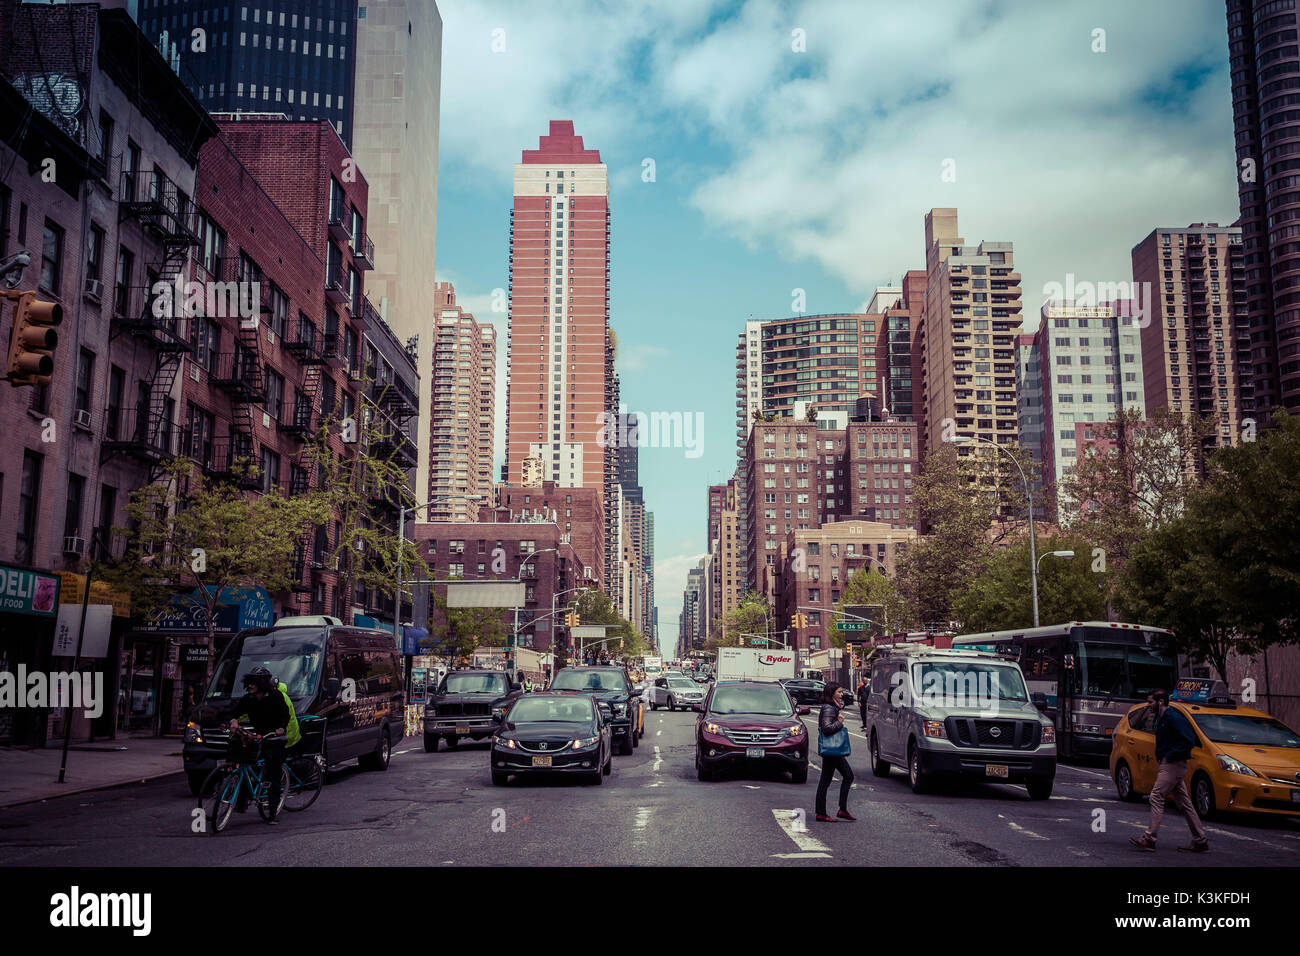 Streetview with traffic in Manhatten, New York, USA Stock Photo